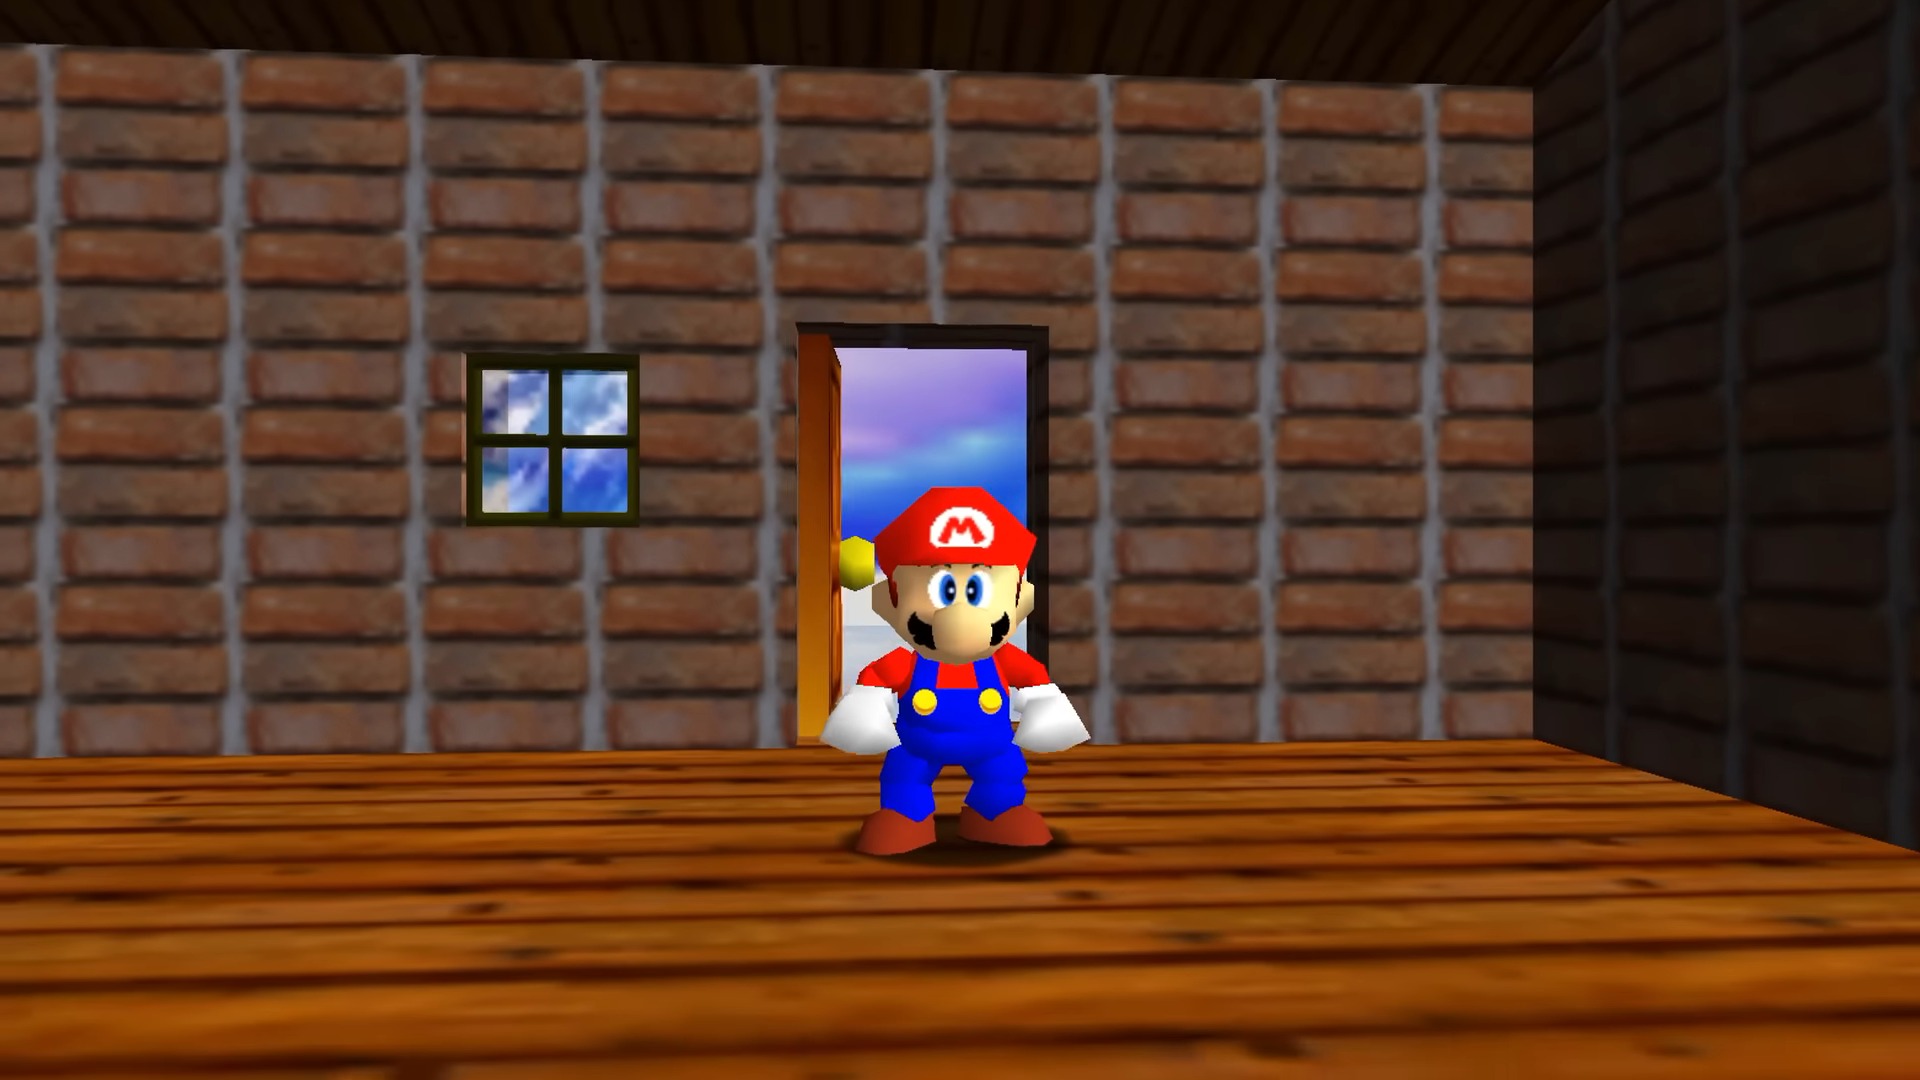 Mario stands inside of the cabin in Cool Cool Mountain with the door open behind him in a screenshot from Super Mario 64